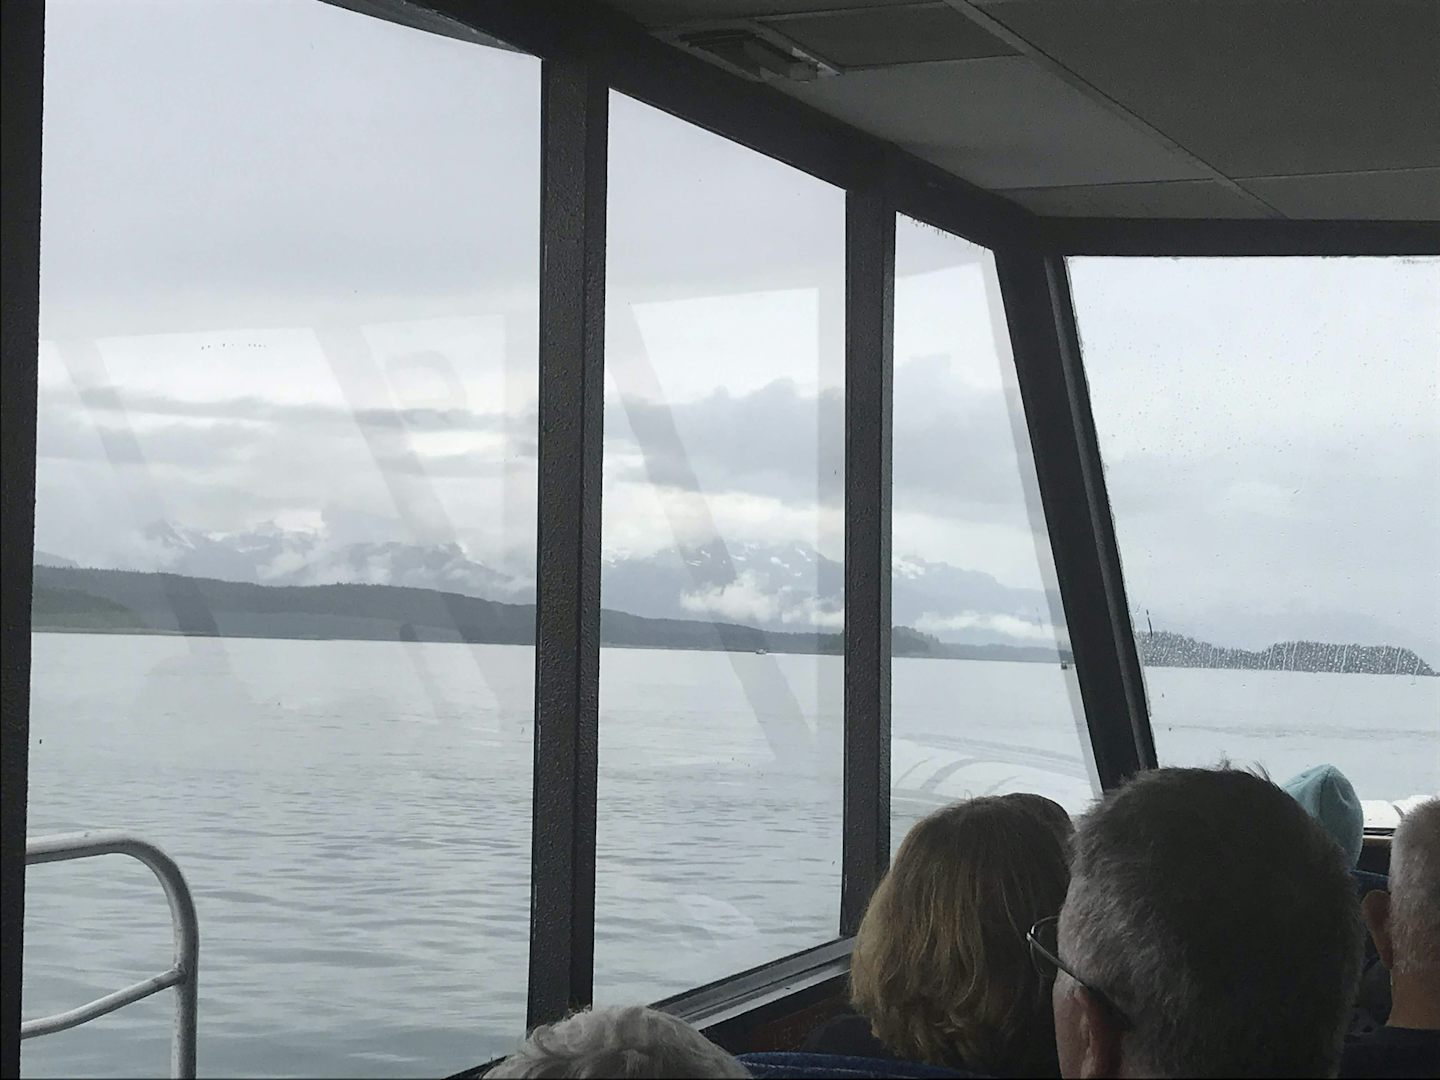 Whale watching in Juneau. No pictures of the whales, they were too fast to